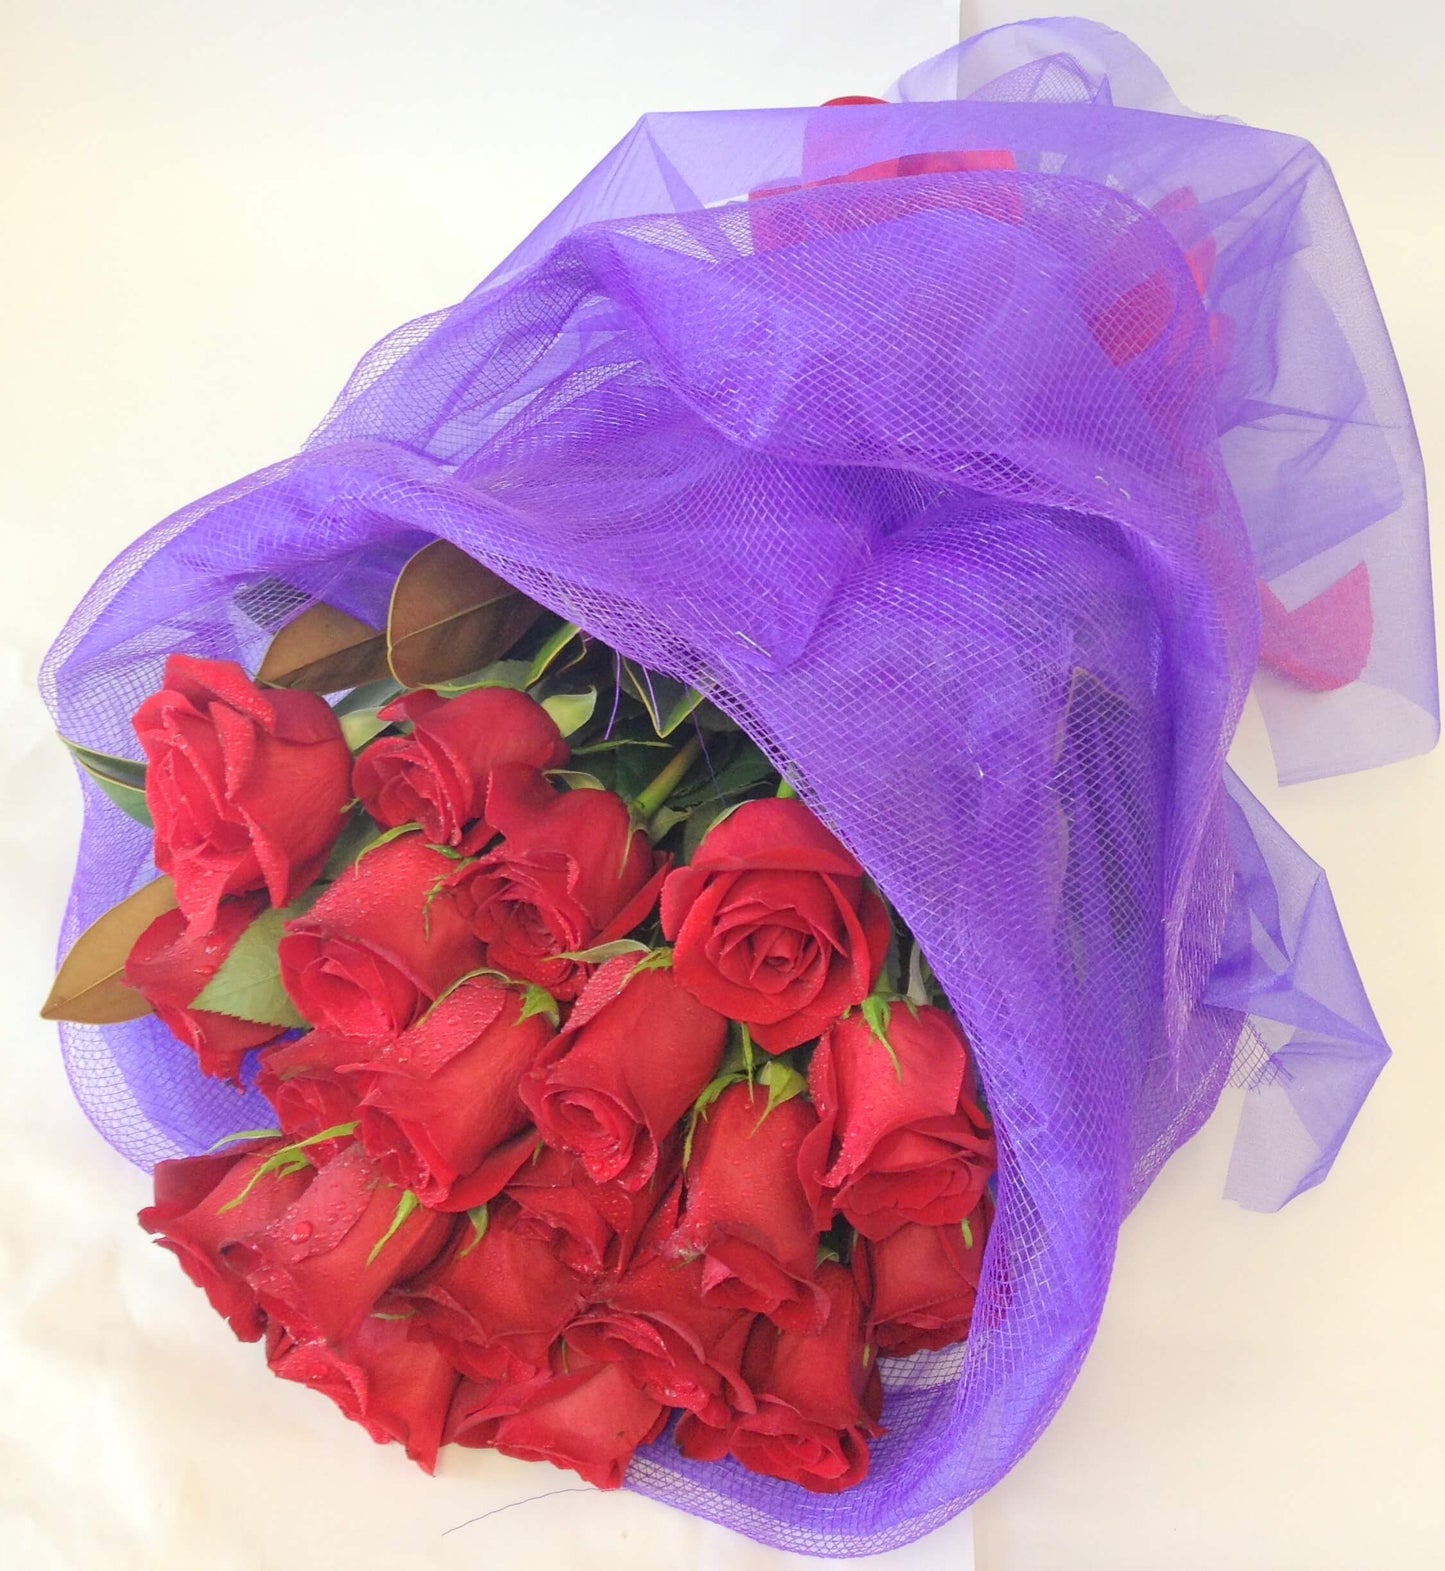 20 superb red roses with in mesh wrap